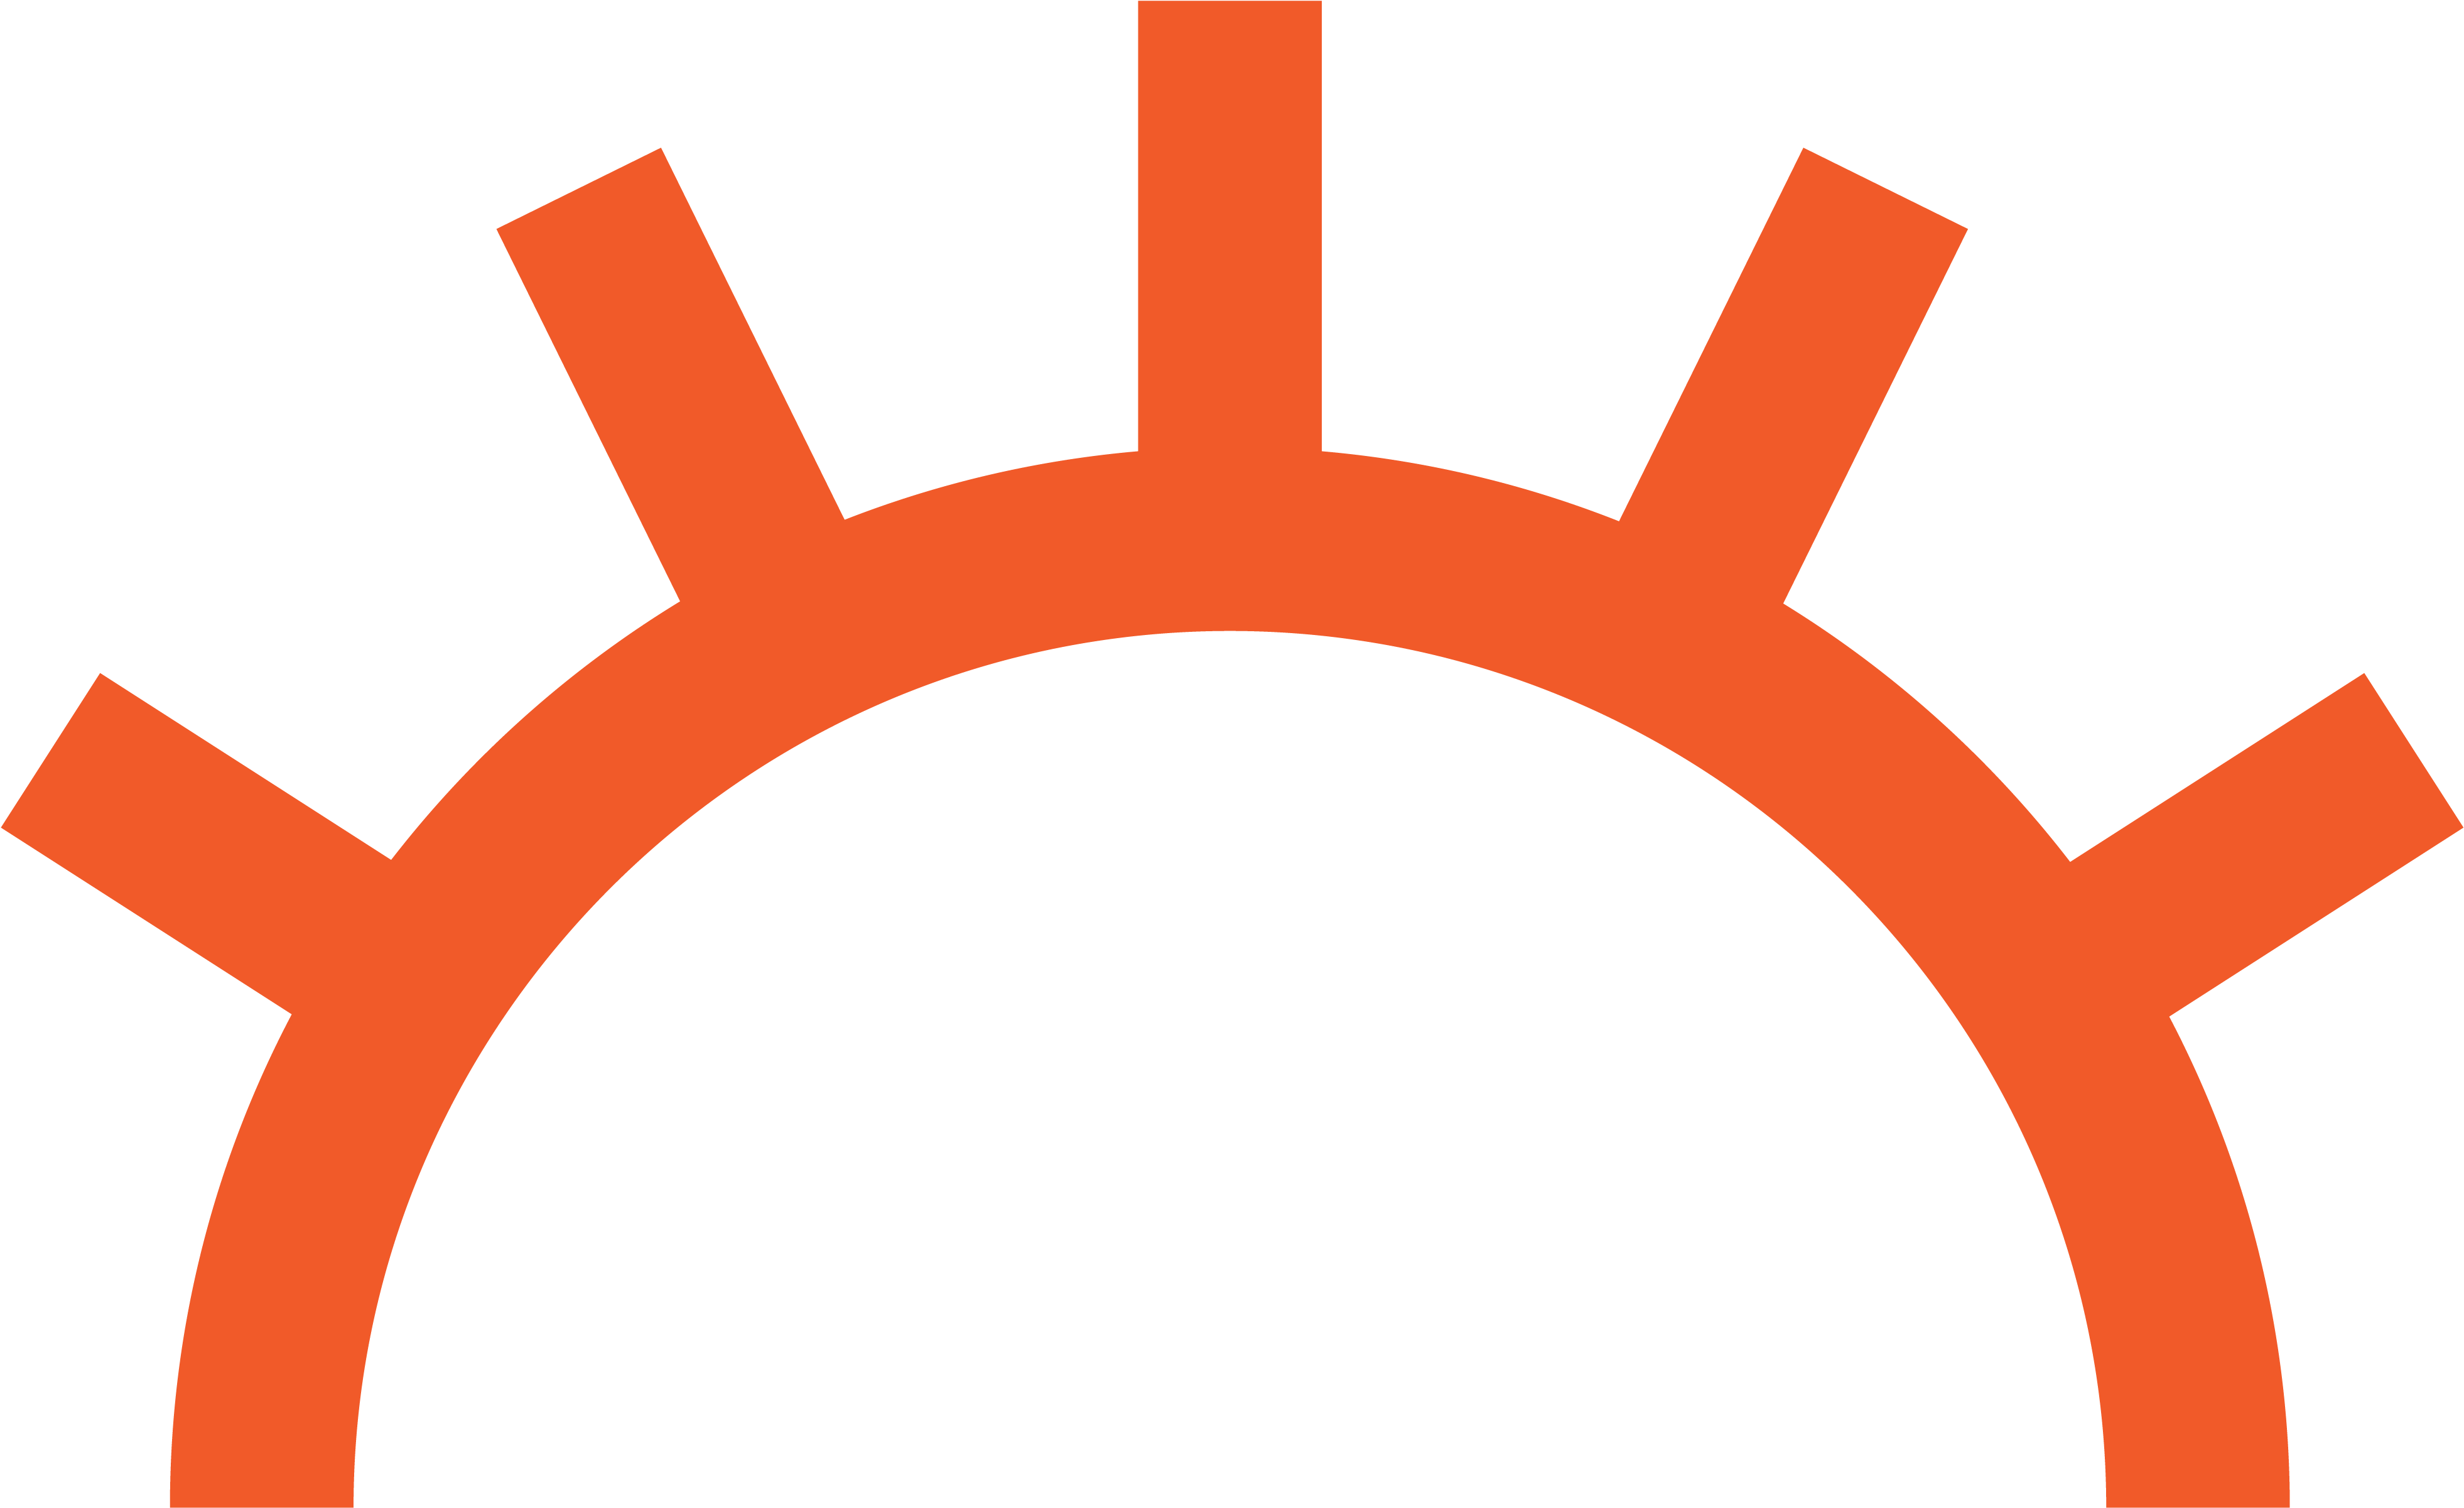 Designed To Compliment Your Storytelling - Sun Energy Icon Free (4167x2542)